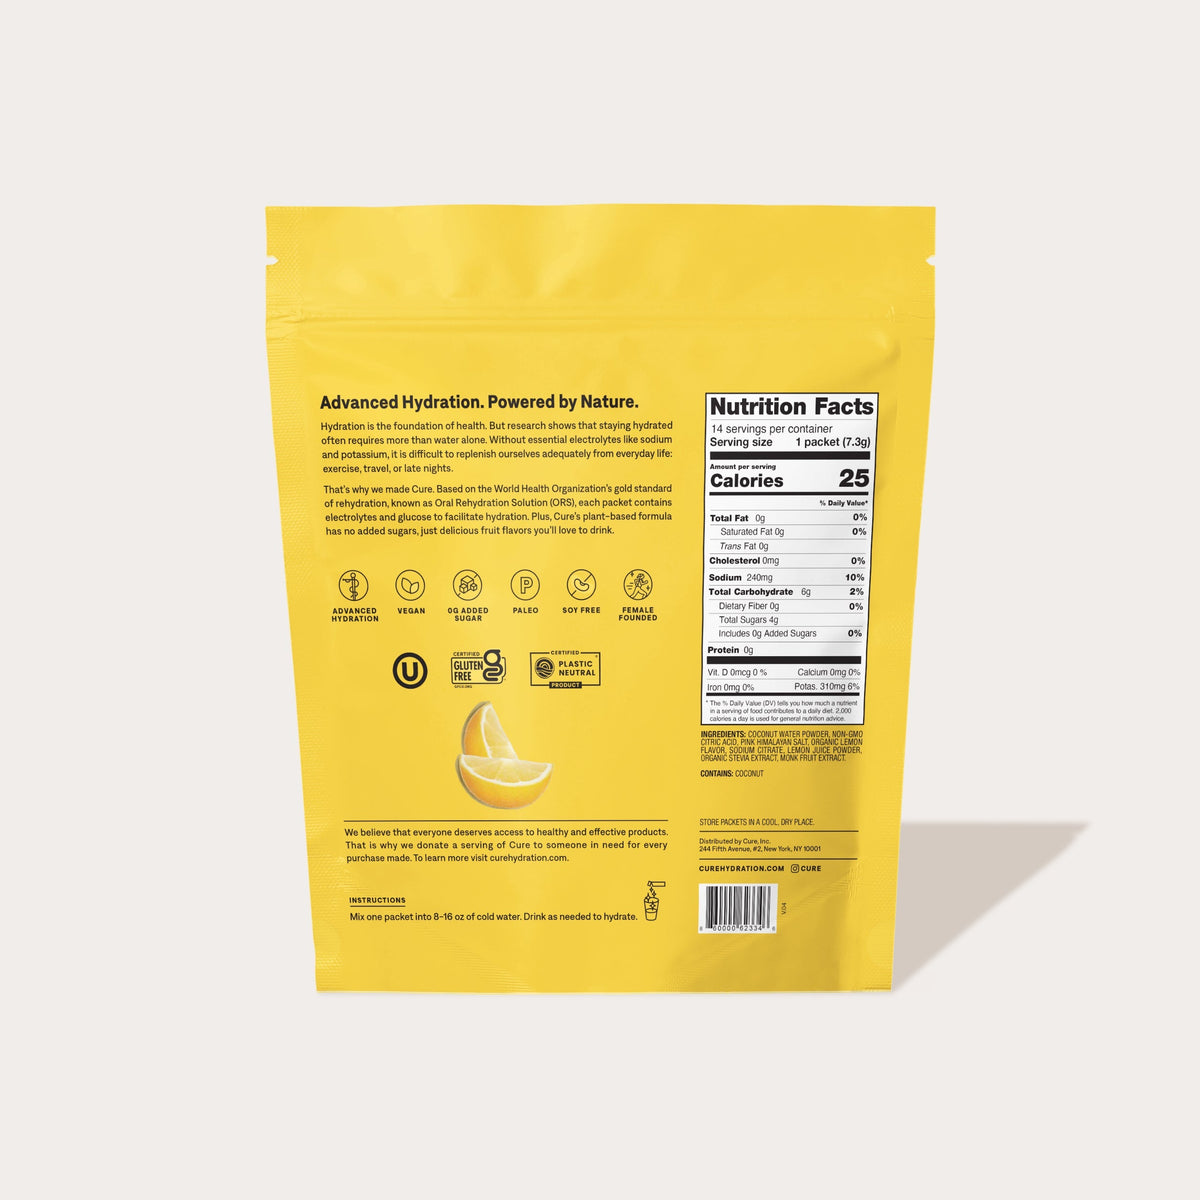 Lemonade - Hydrating Electrolyte Drink Mix with no Added Sugar or Artificial Ingredients by Cure